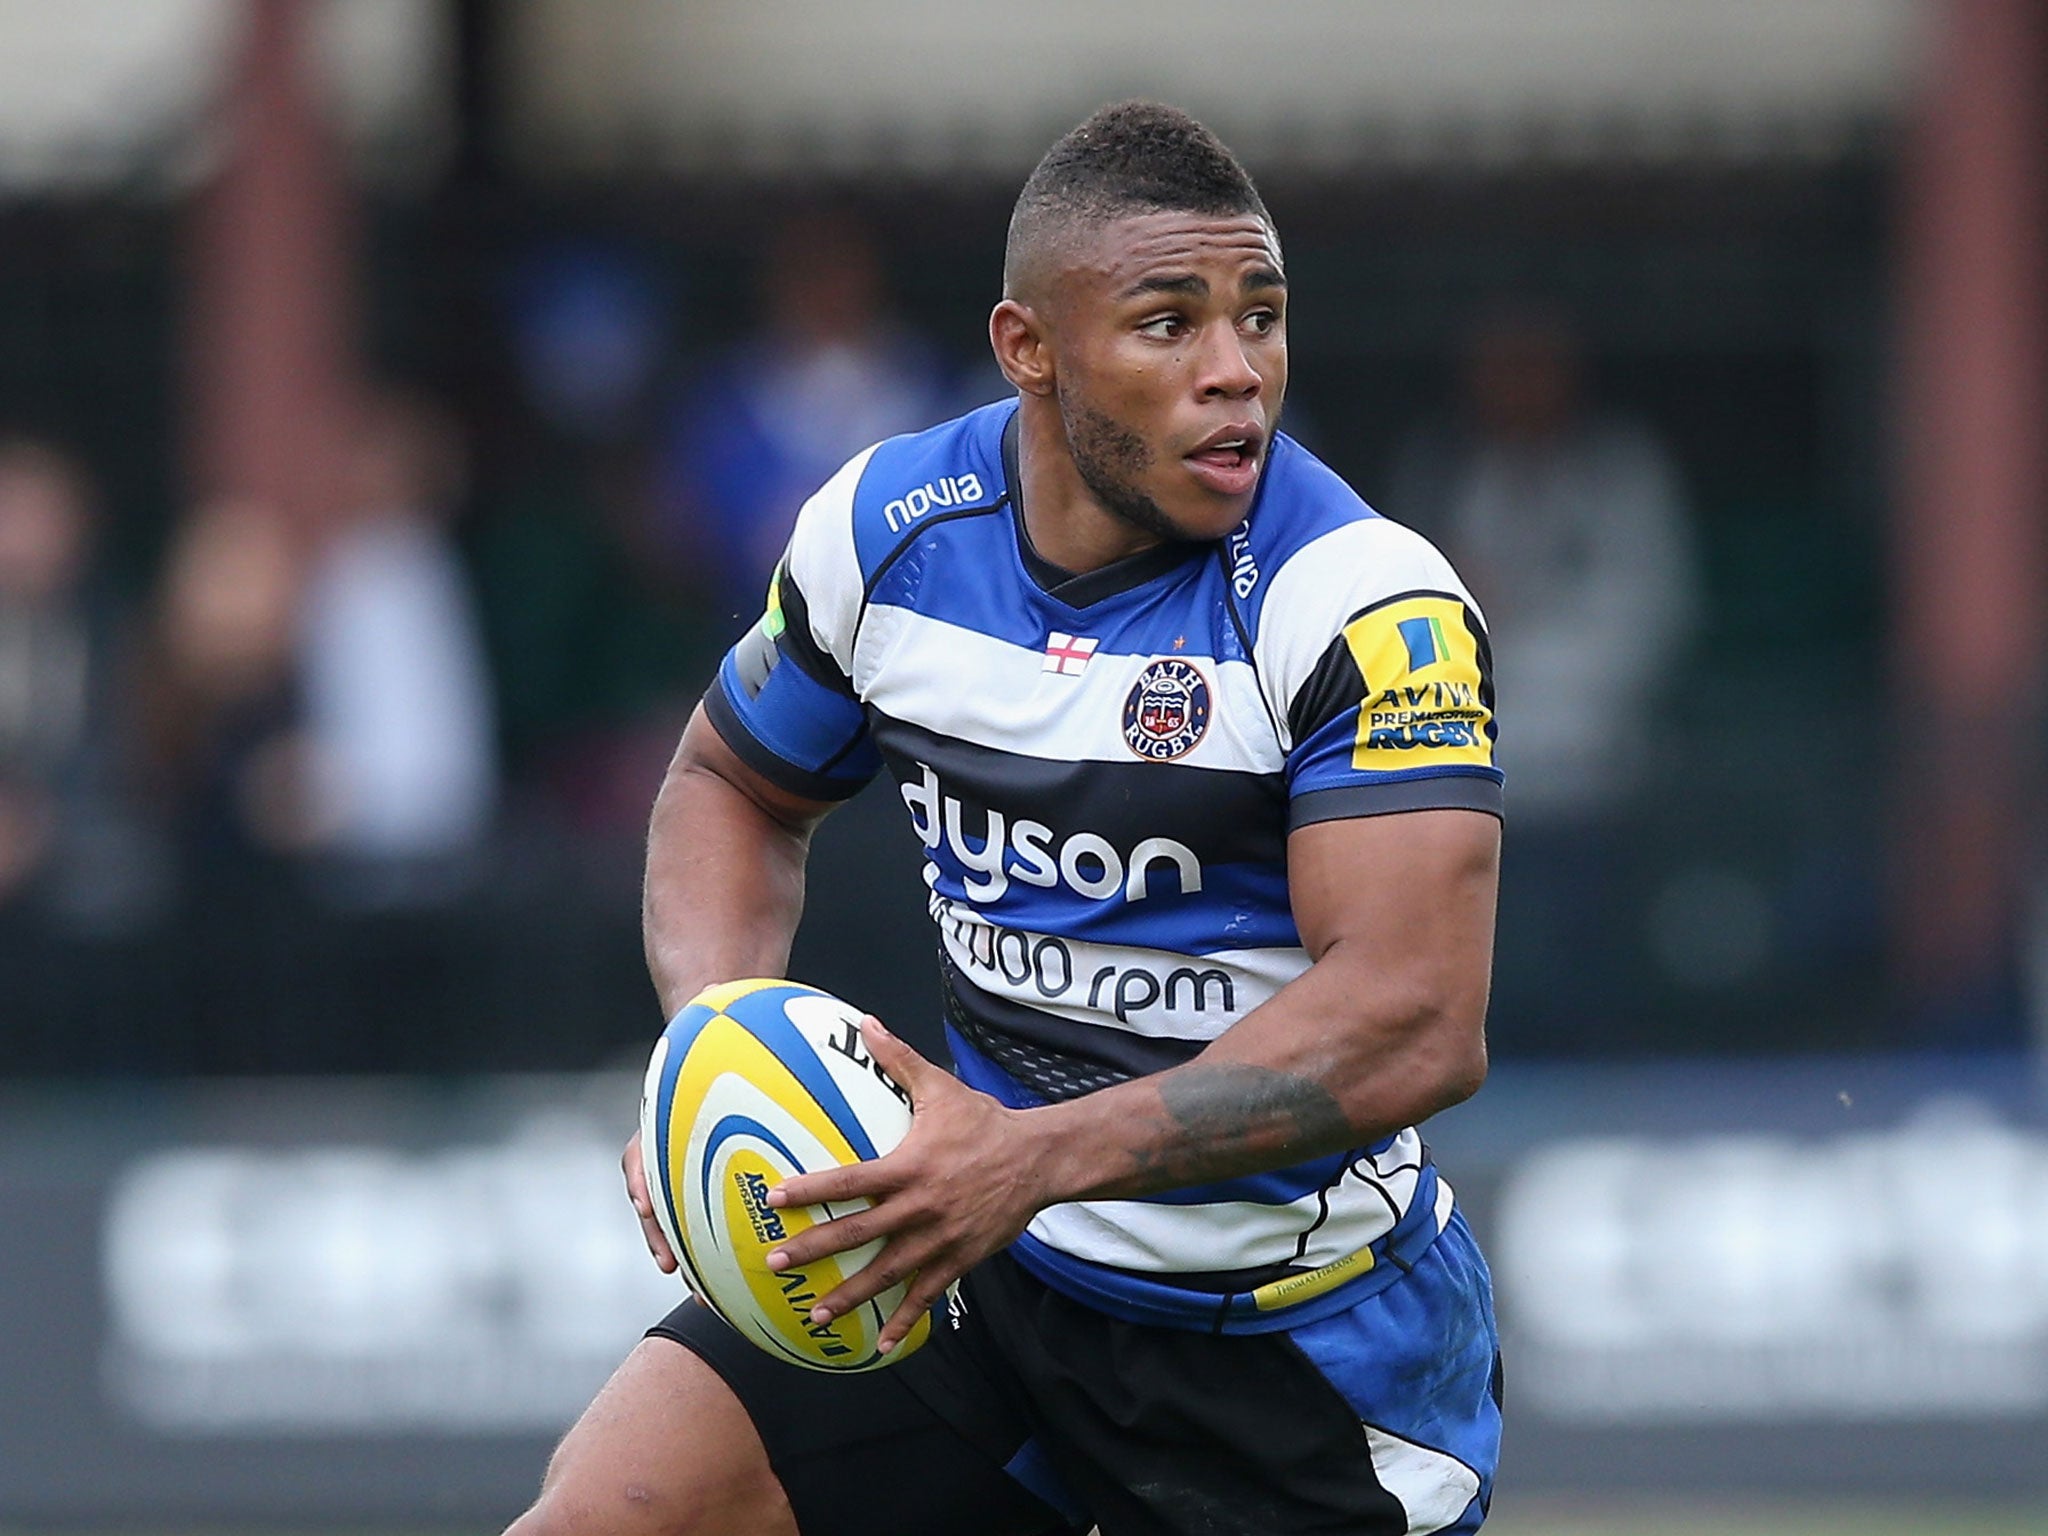 Kyle Eastmond scored one of Bath’s five tries in the club’s record 45-0 victory over Leicester